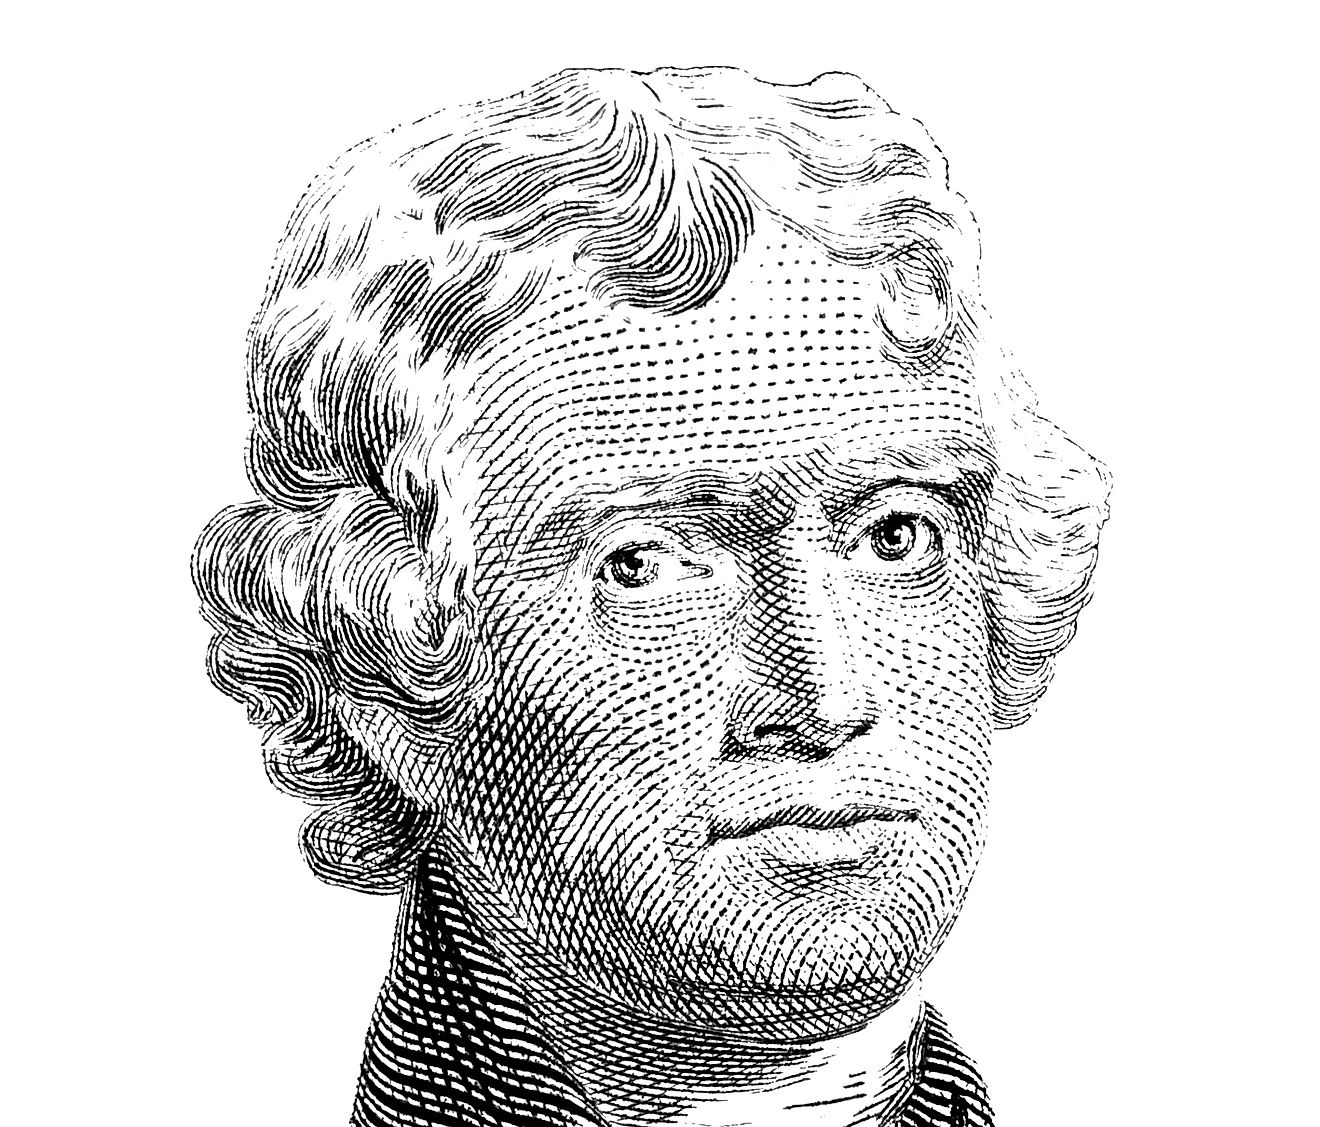 The impact of Thomas Jefferson's life's work spanned the numerous fields in which he was a pioneer.